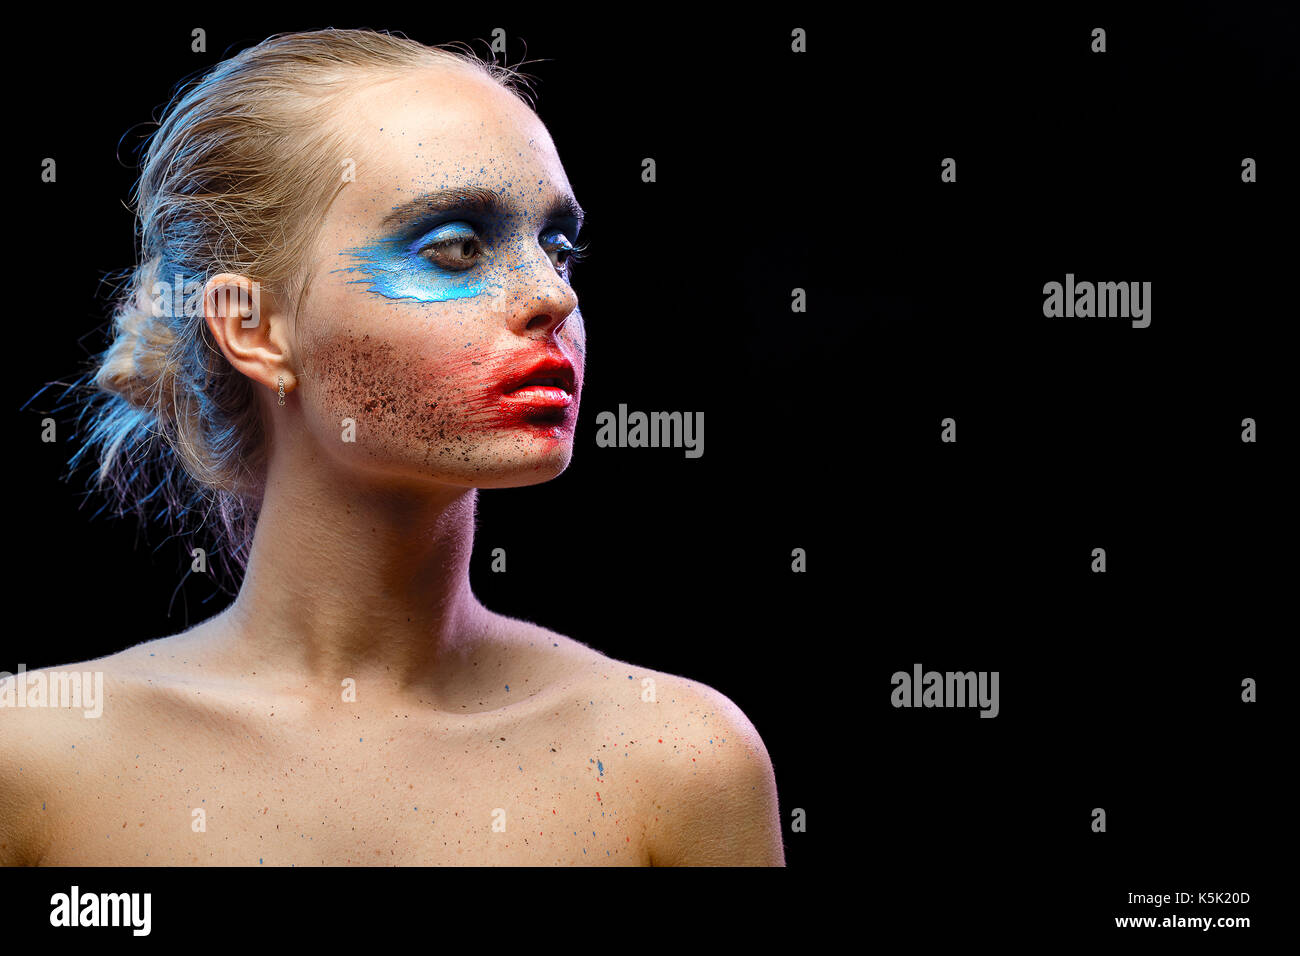 female portrait with creative multicolored makeup on black background Stock Photo